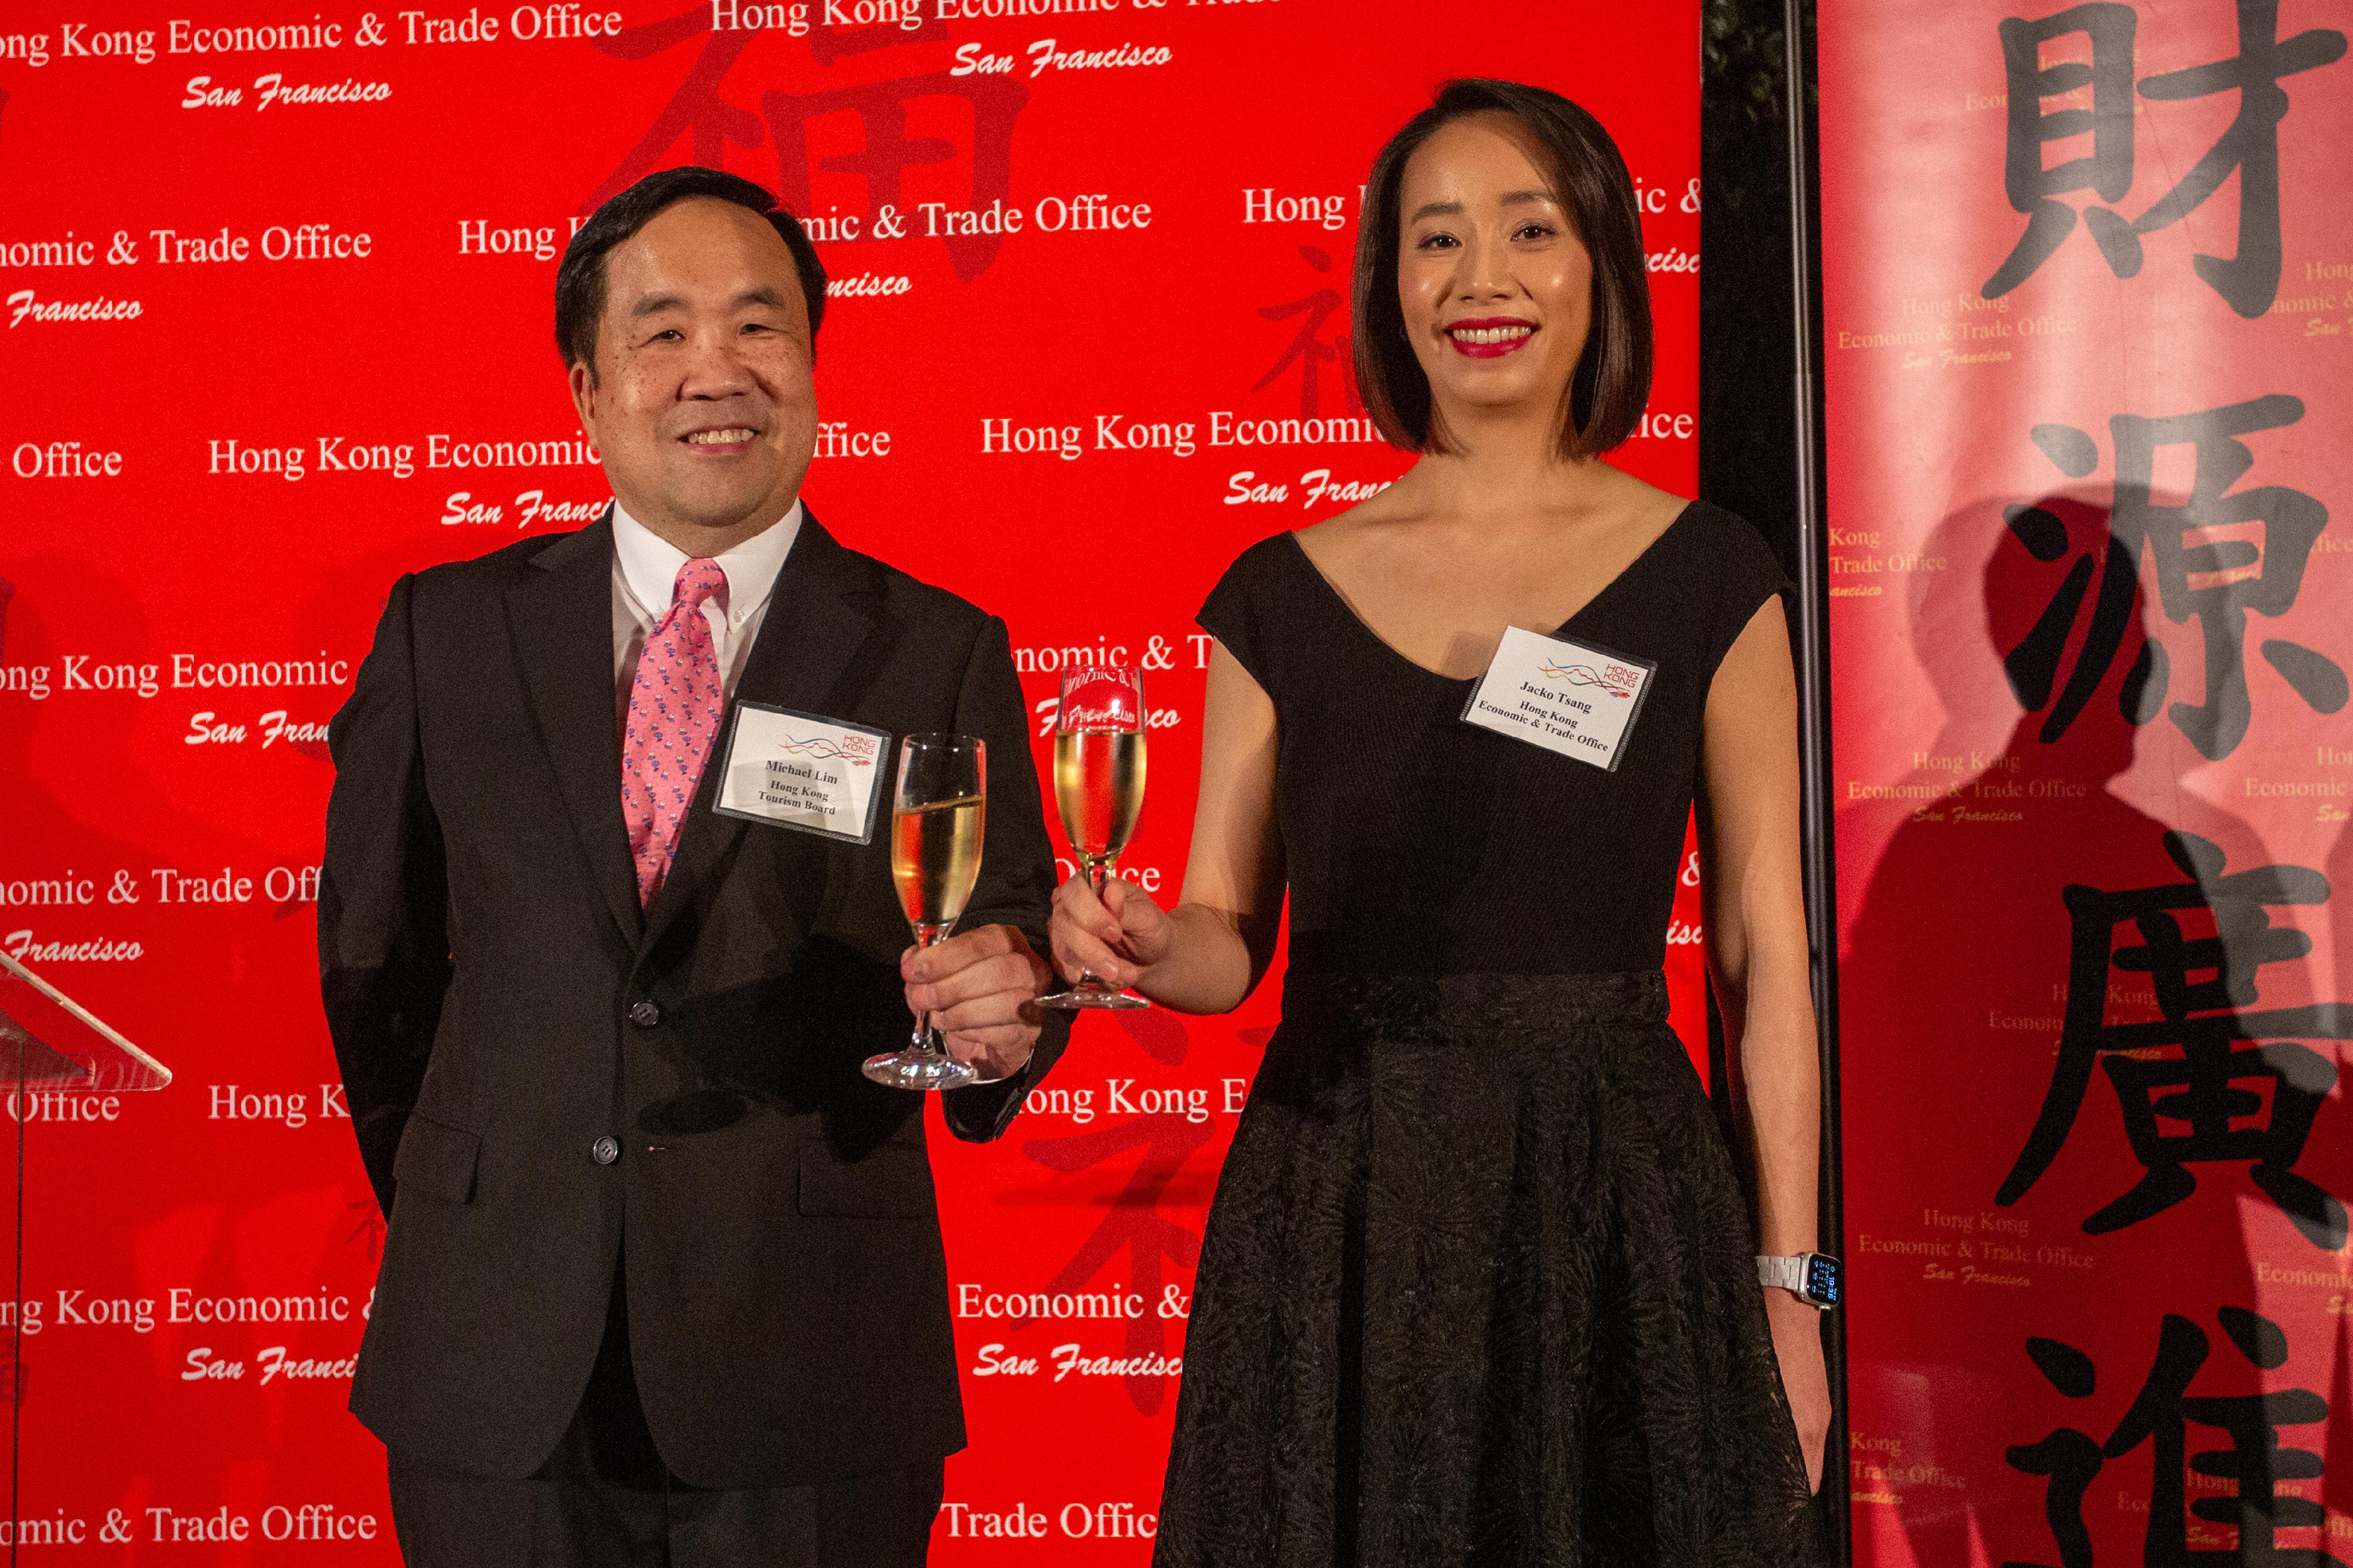 The Director of the Hong Kong Economic and Trade Office in San Francisco, Ms Jacko Tsang (right), and the Director for Americas of the Hong Kong Tourism Board, Mr Michael Lim (left), give a celebratory toast to welcome the Year of the Dragon at the spring reception in San Francisco on February 27 (San Francisco time).